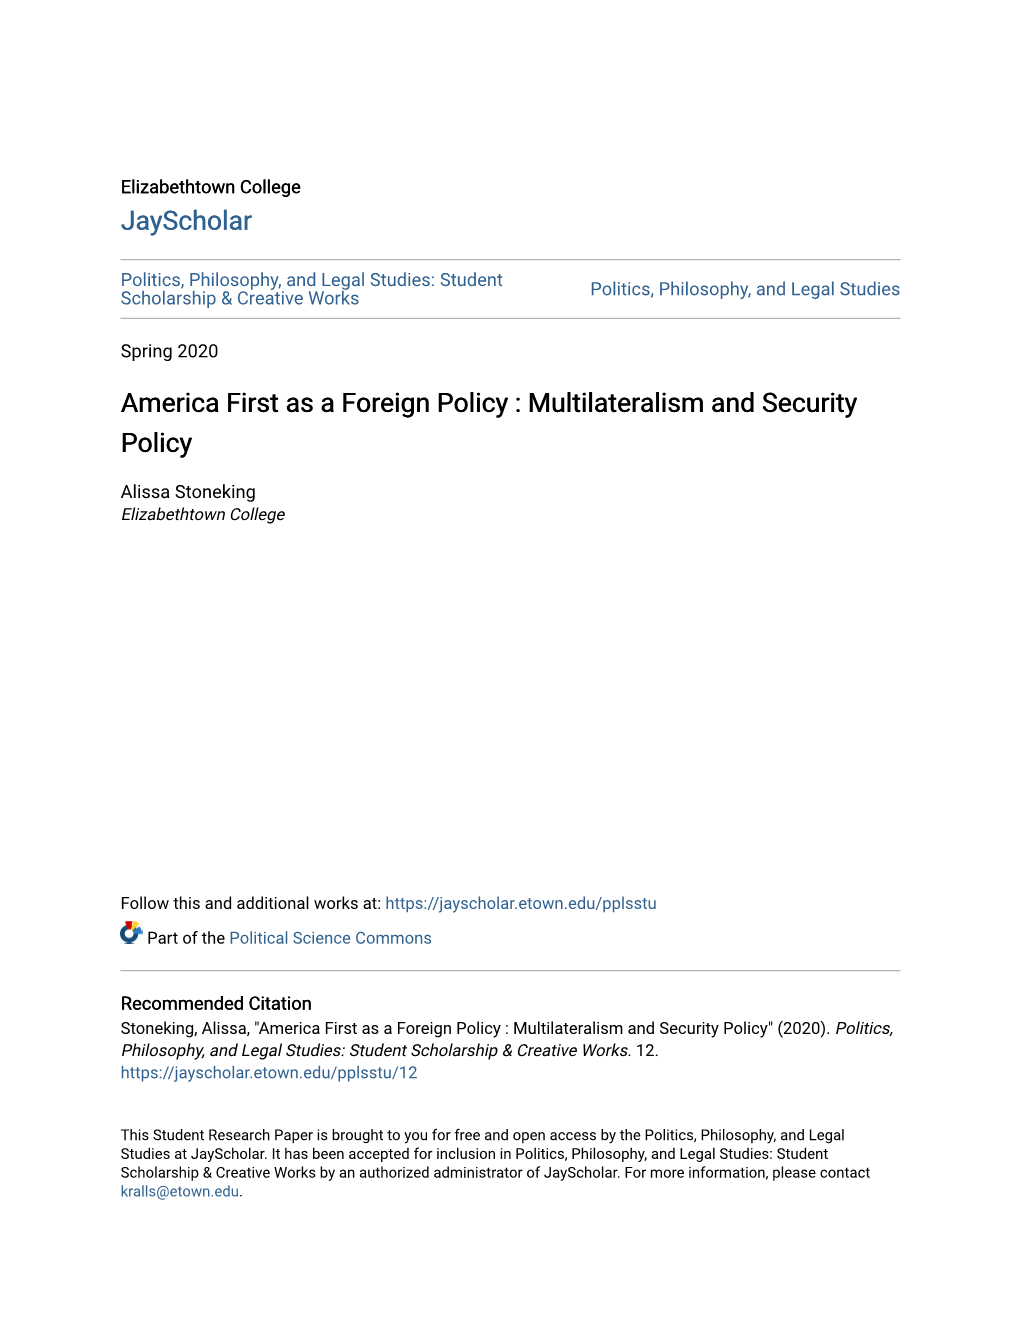 America First As a Foreign Policy : Multilateralism and Security Policy